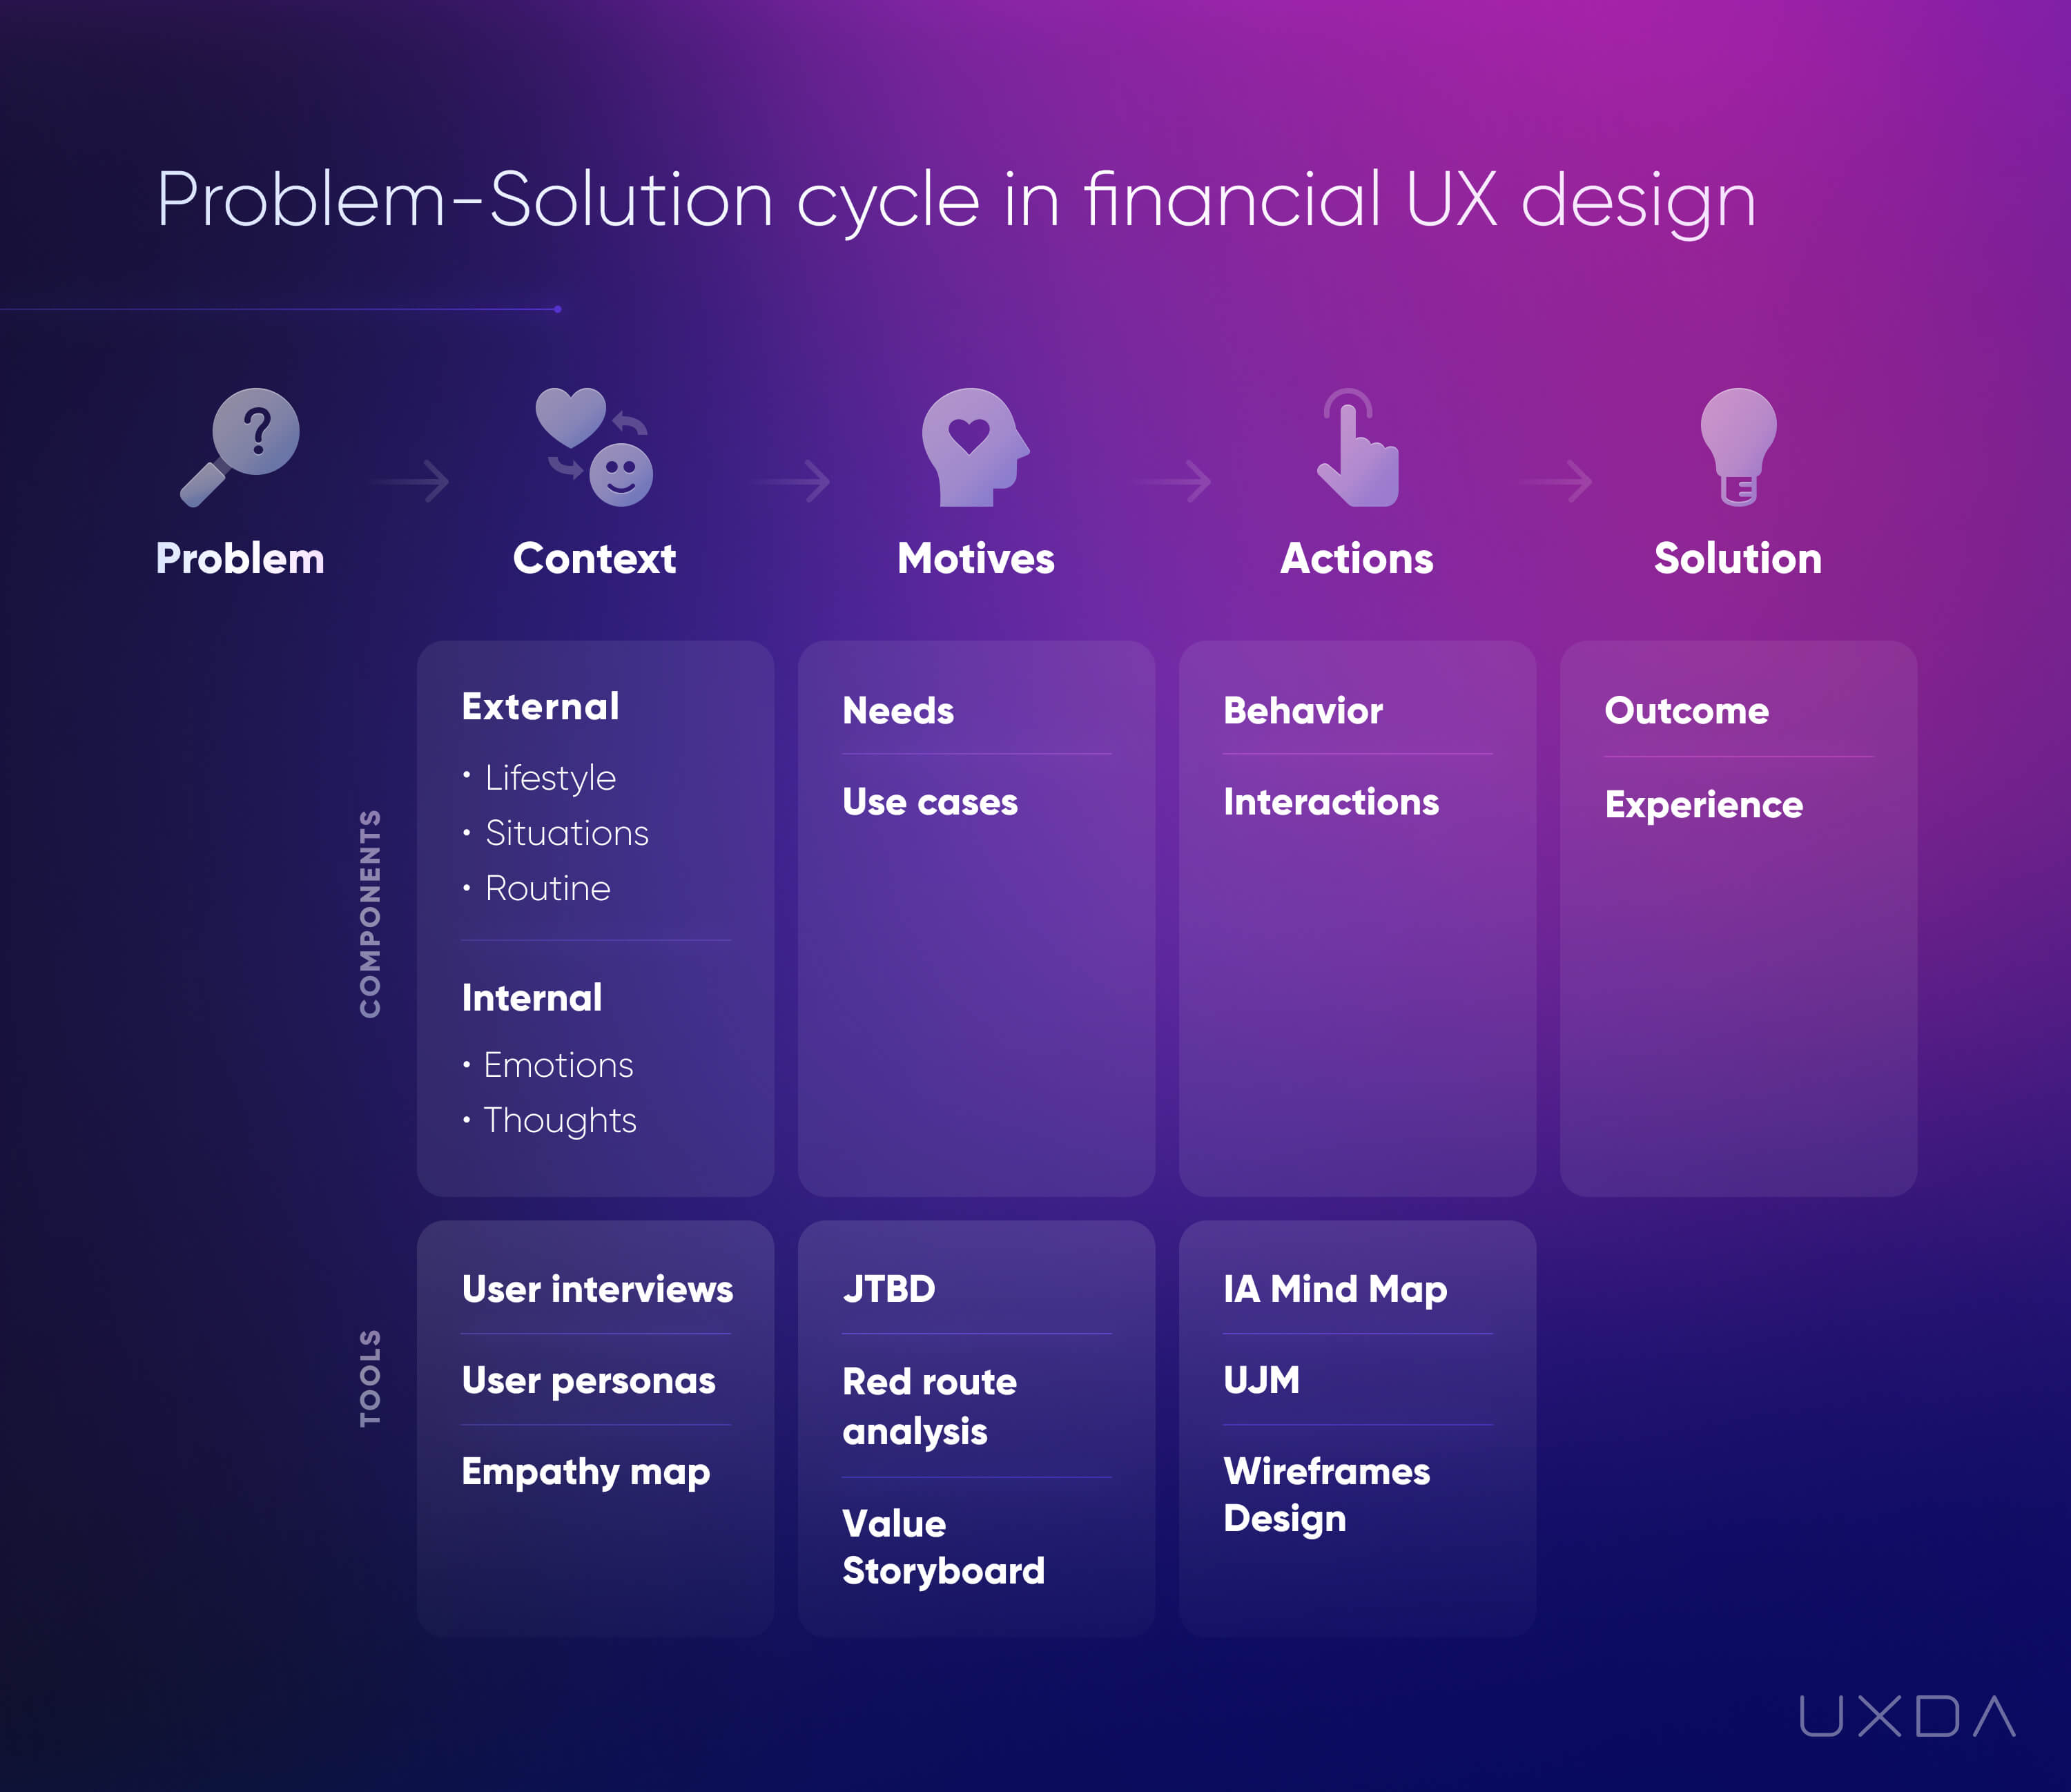 Purpose-Driven Digital Banking Overcome Post-Pandemic UX Design Problem-solution cycle